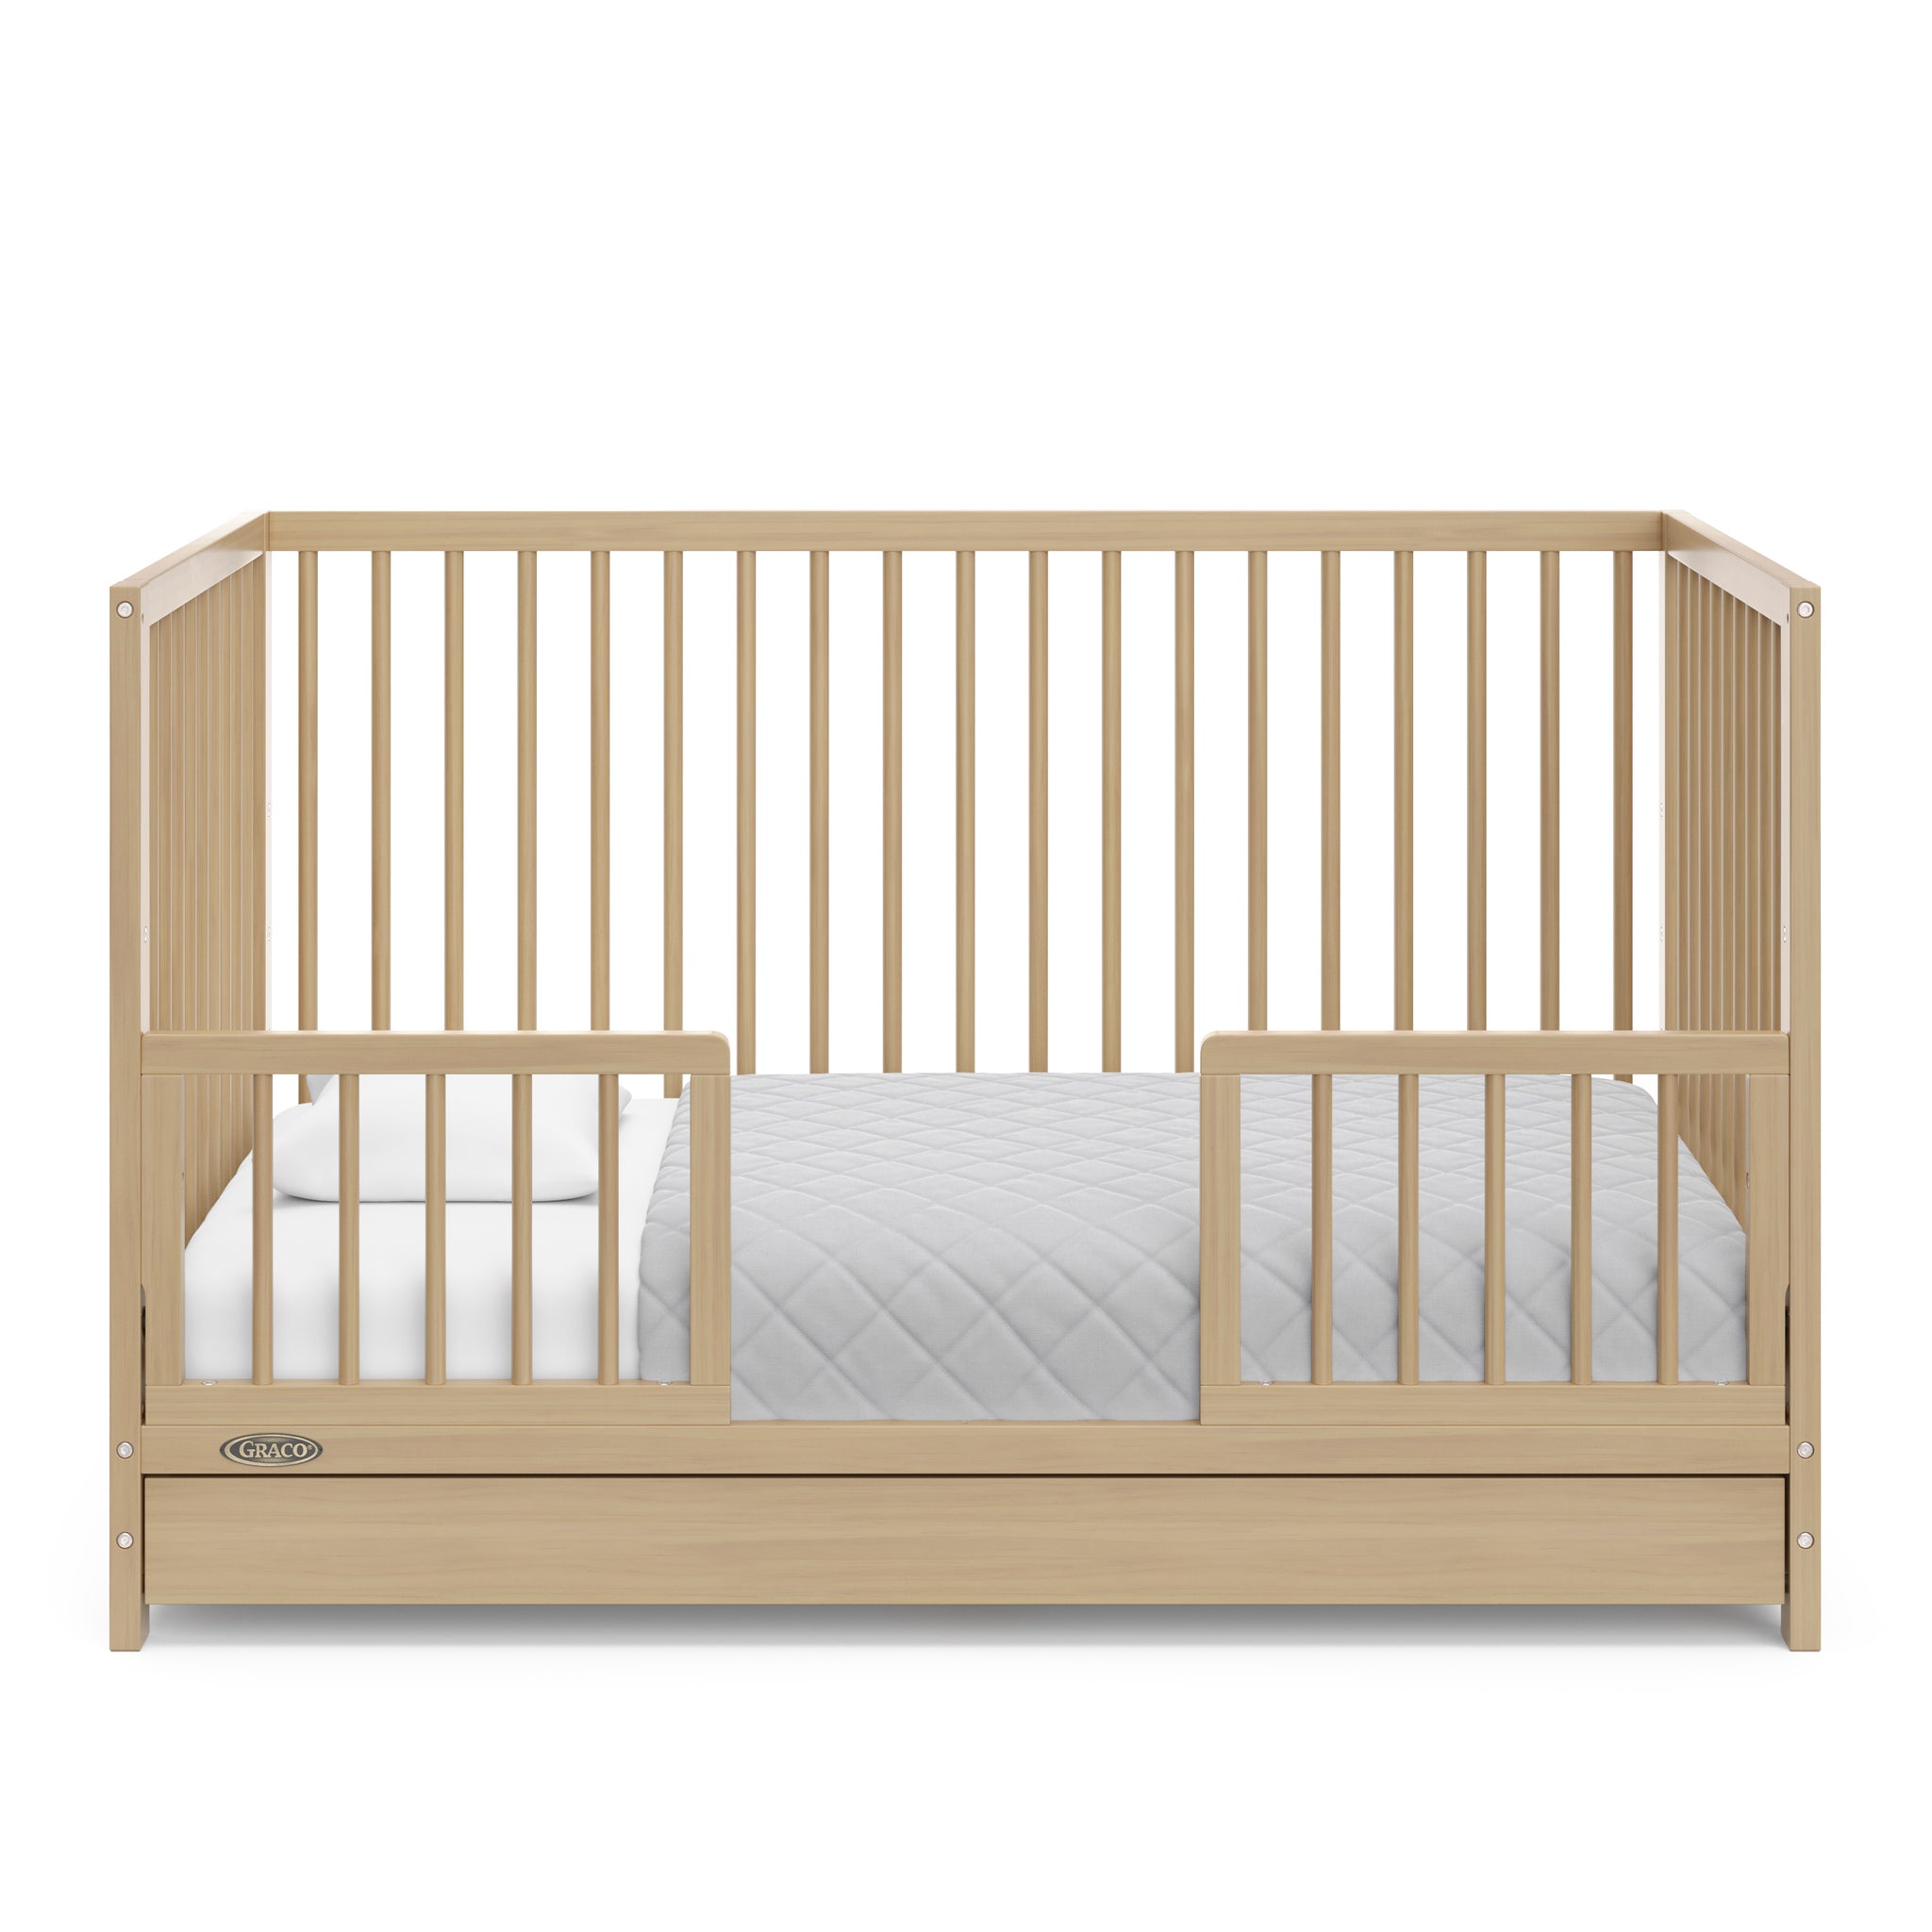 Driftwood crib with drawer in toddler bed conversion with two safety guardrails